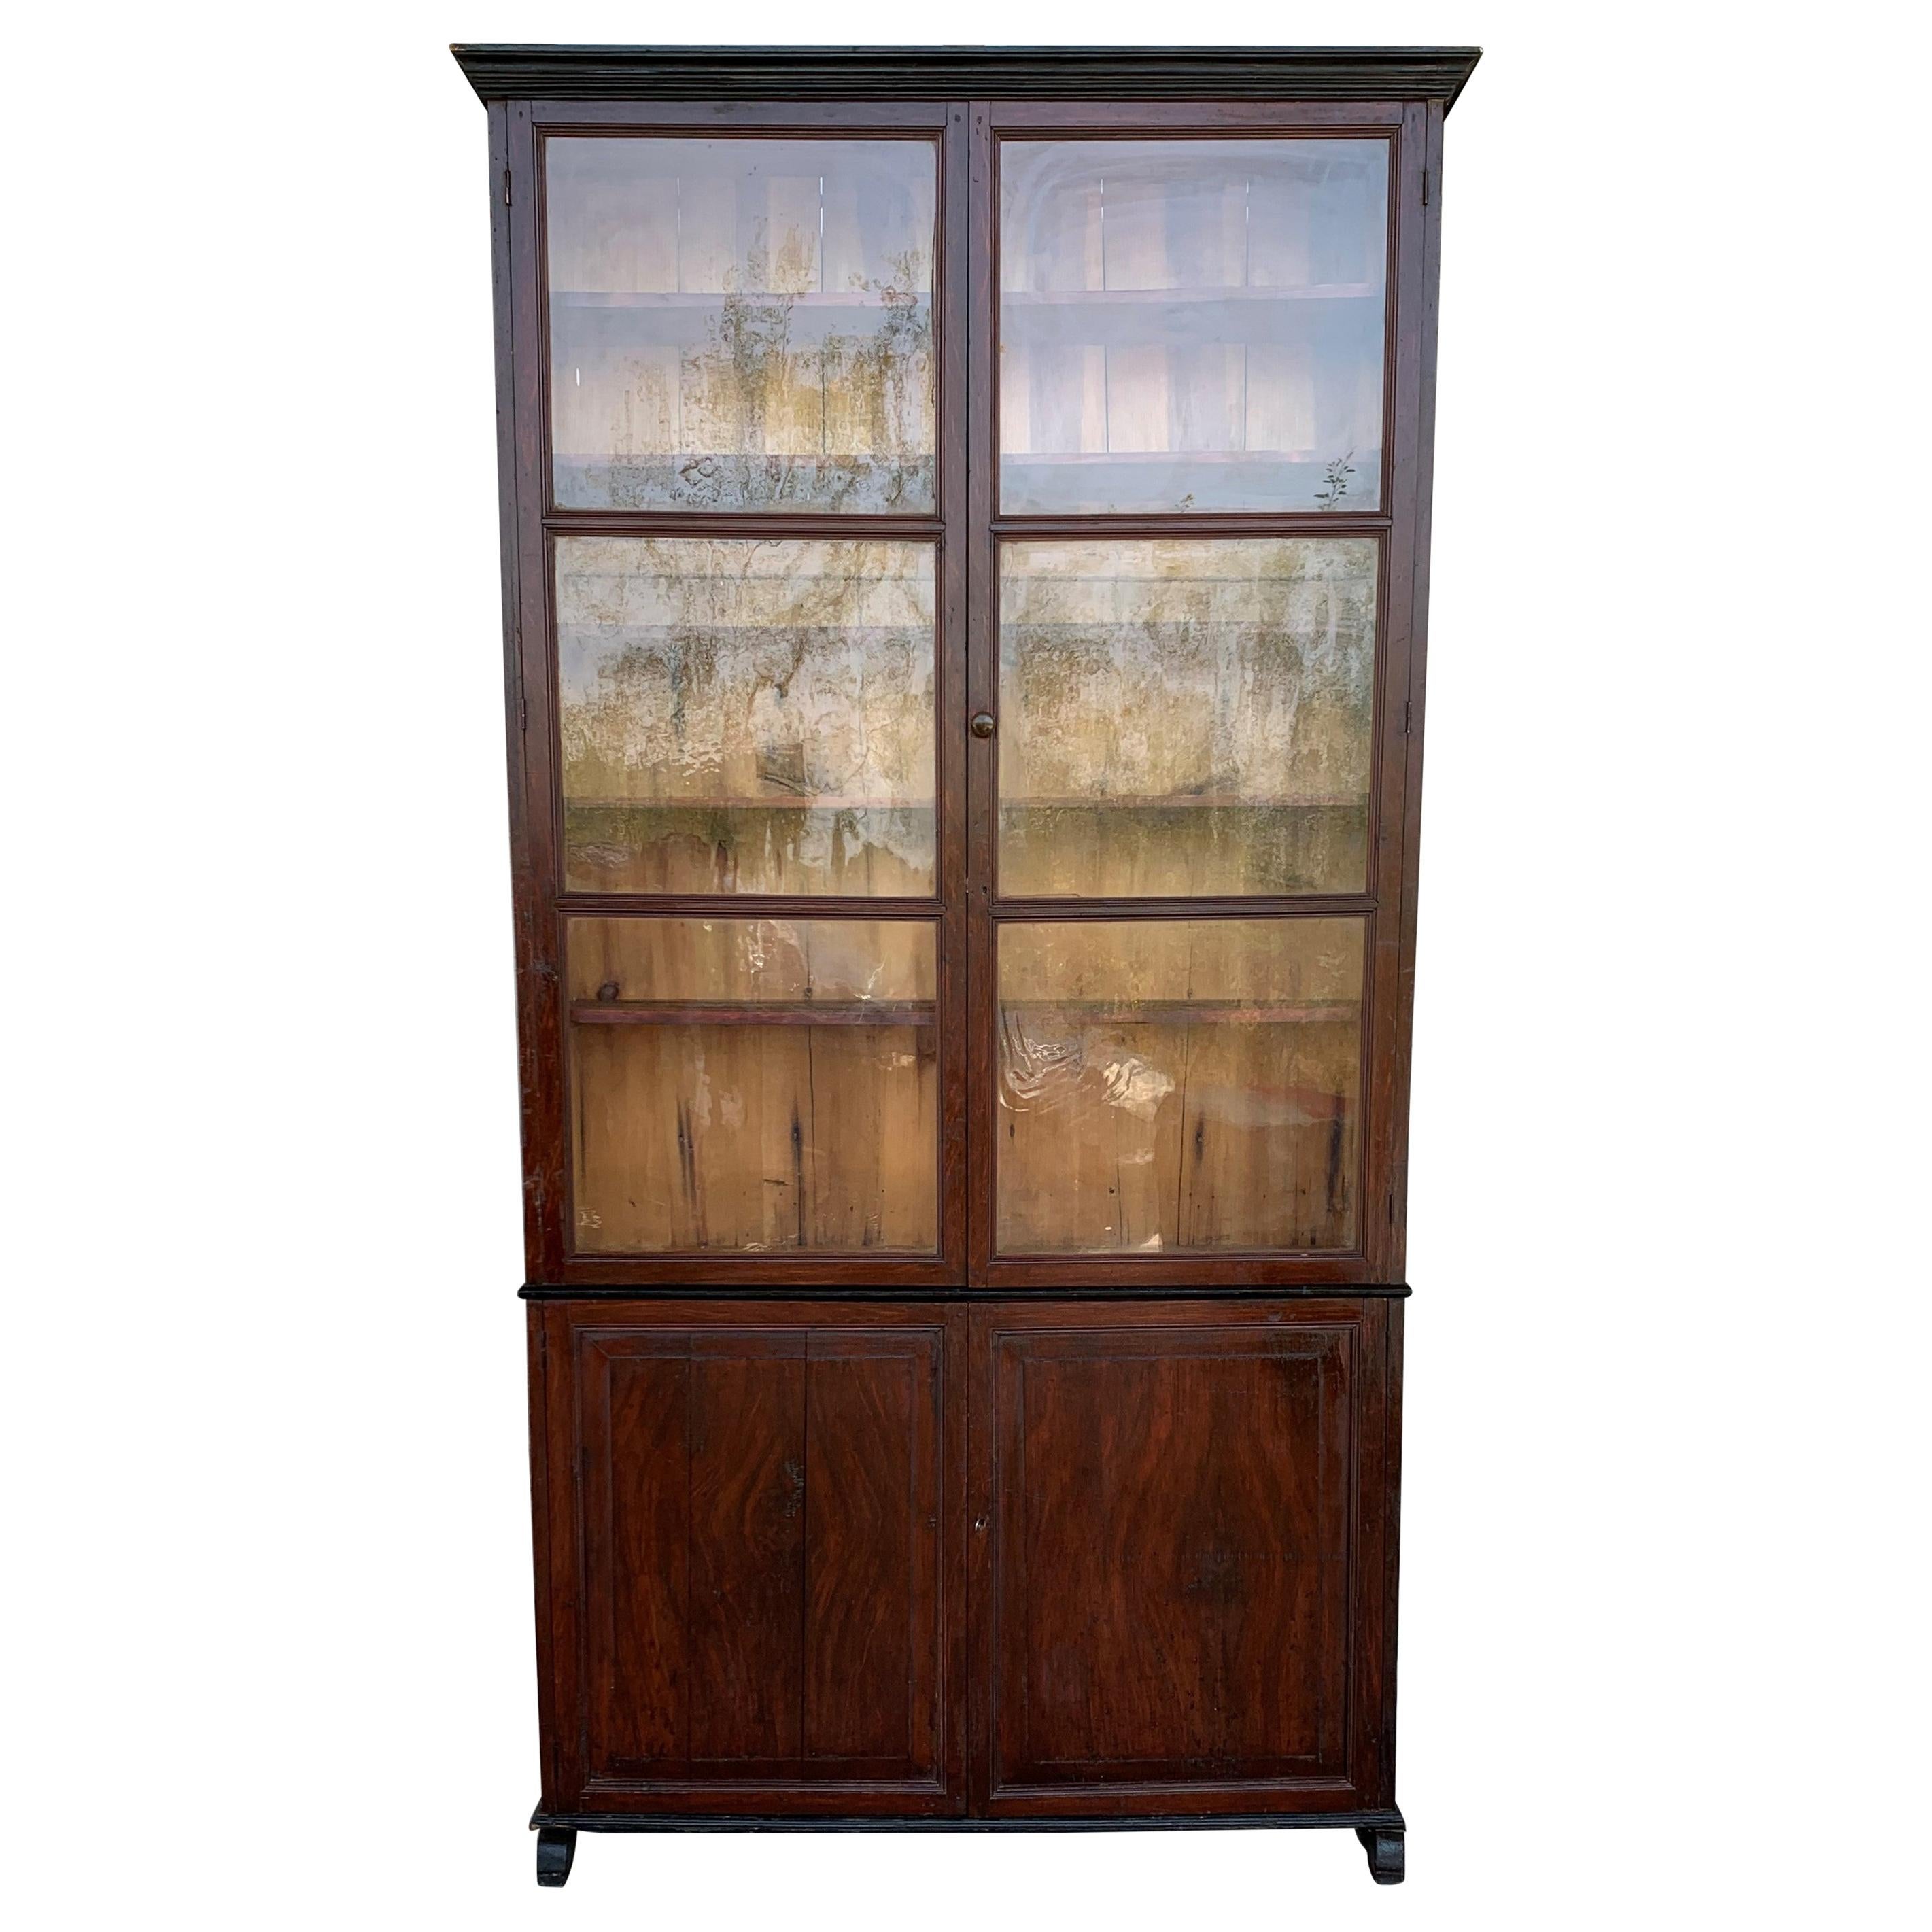 Spanish Large Pine Cupboard or Bookcase with Glass Vitrine, 19th Century